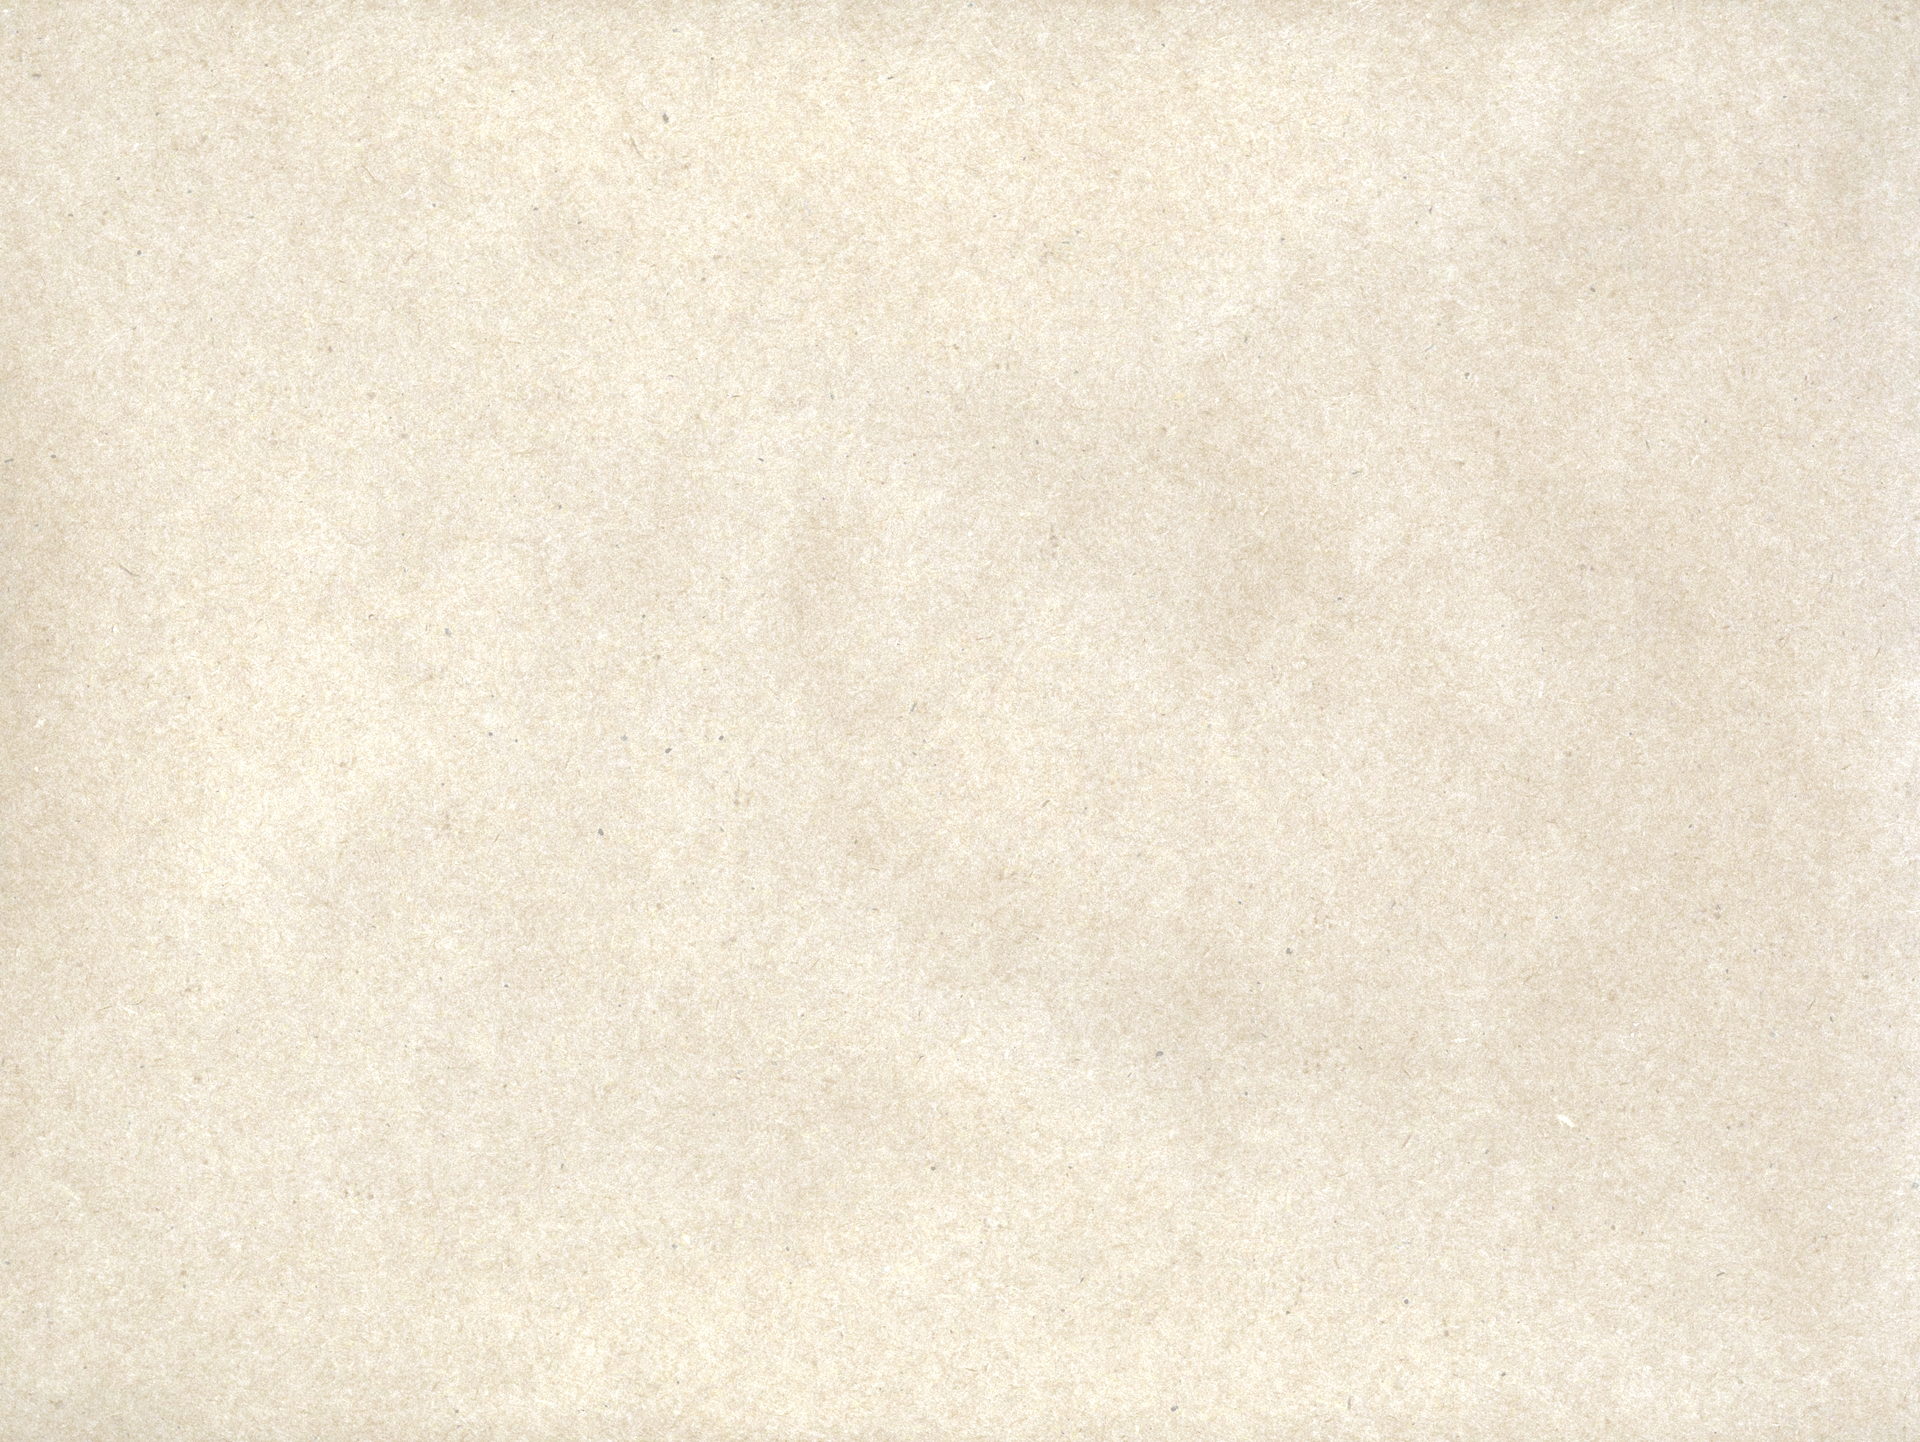 General 1920x1442 paper texture minimalism simple background